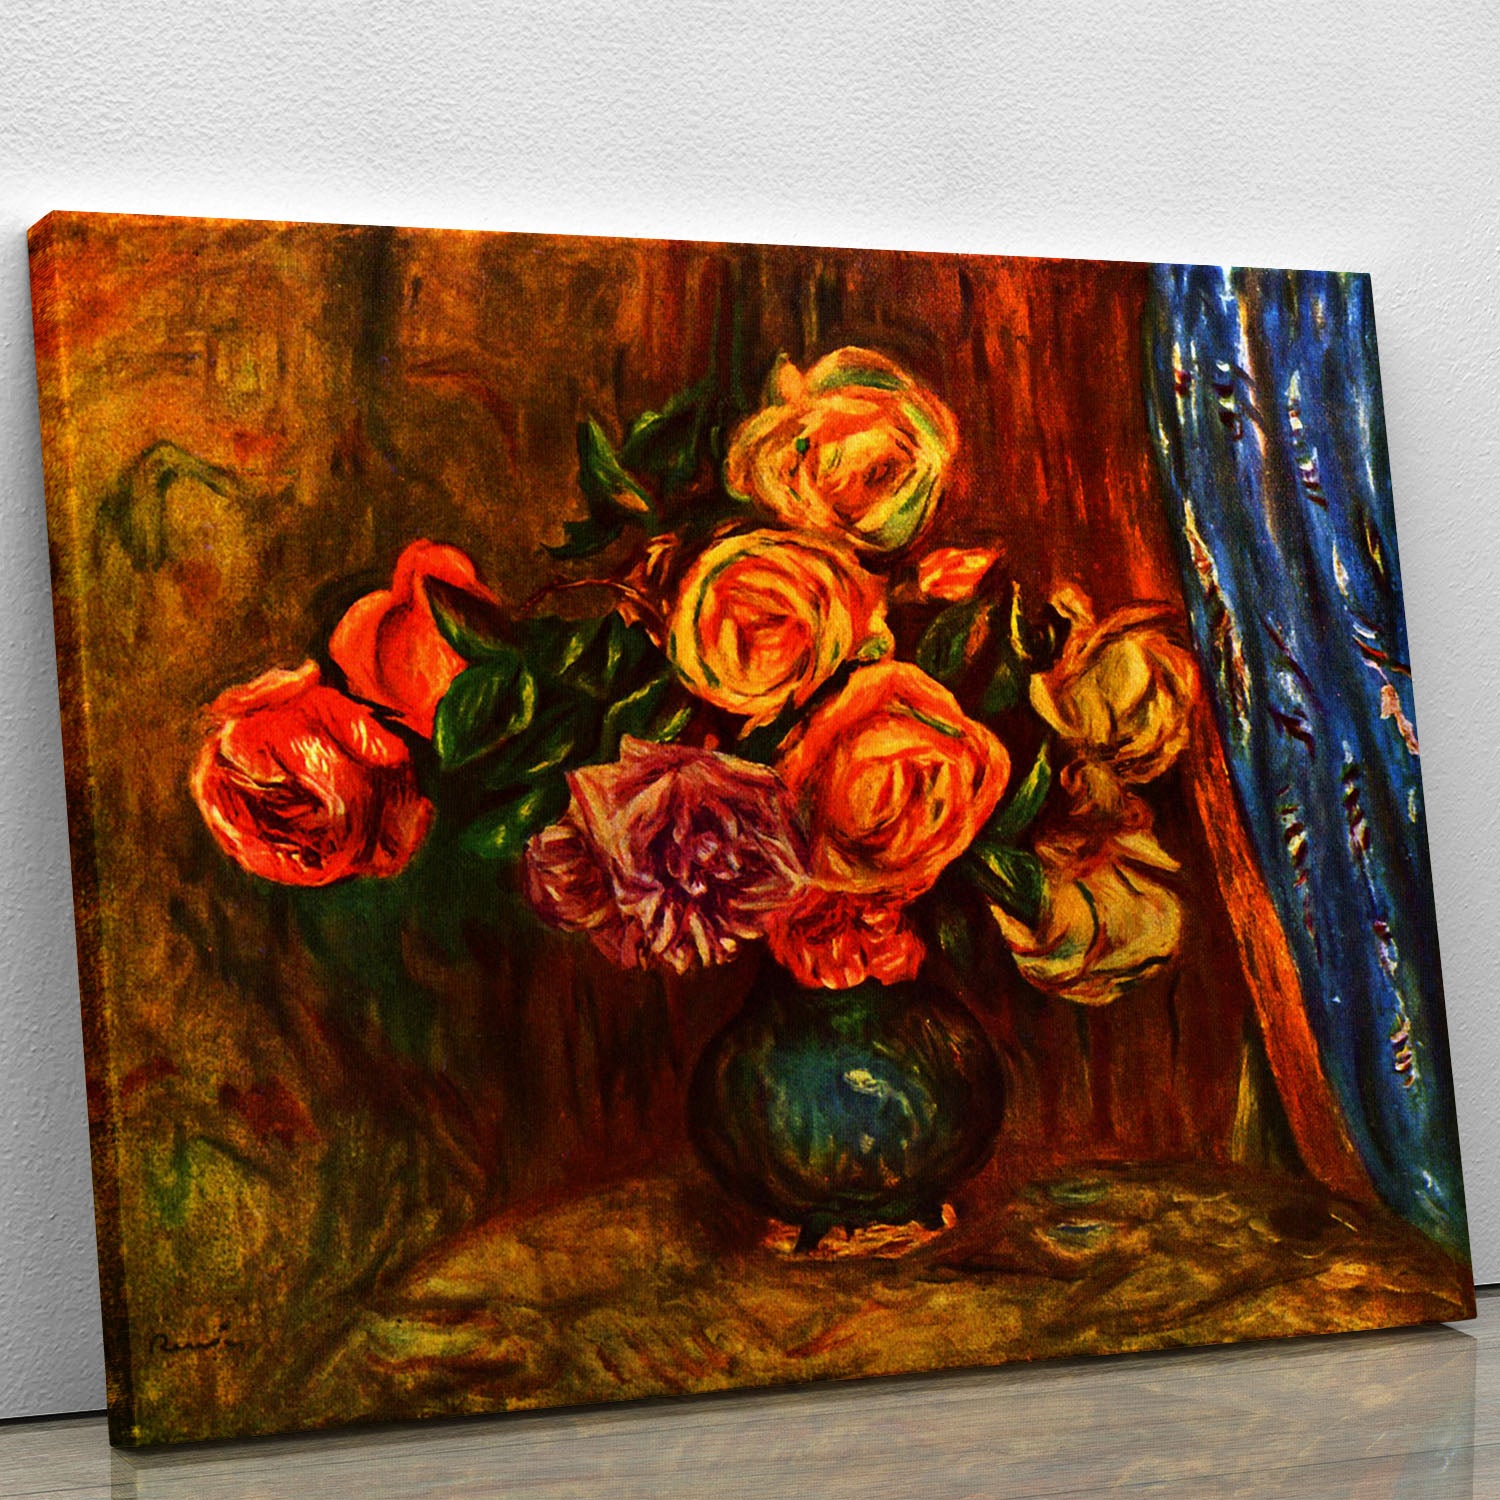 Still life roses before a blue curtain by Renoir Canvas Print or Poster - Canvas Art Rocks - 1